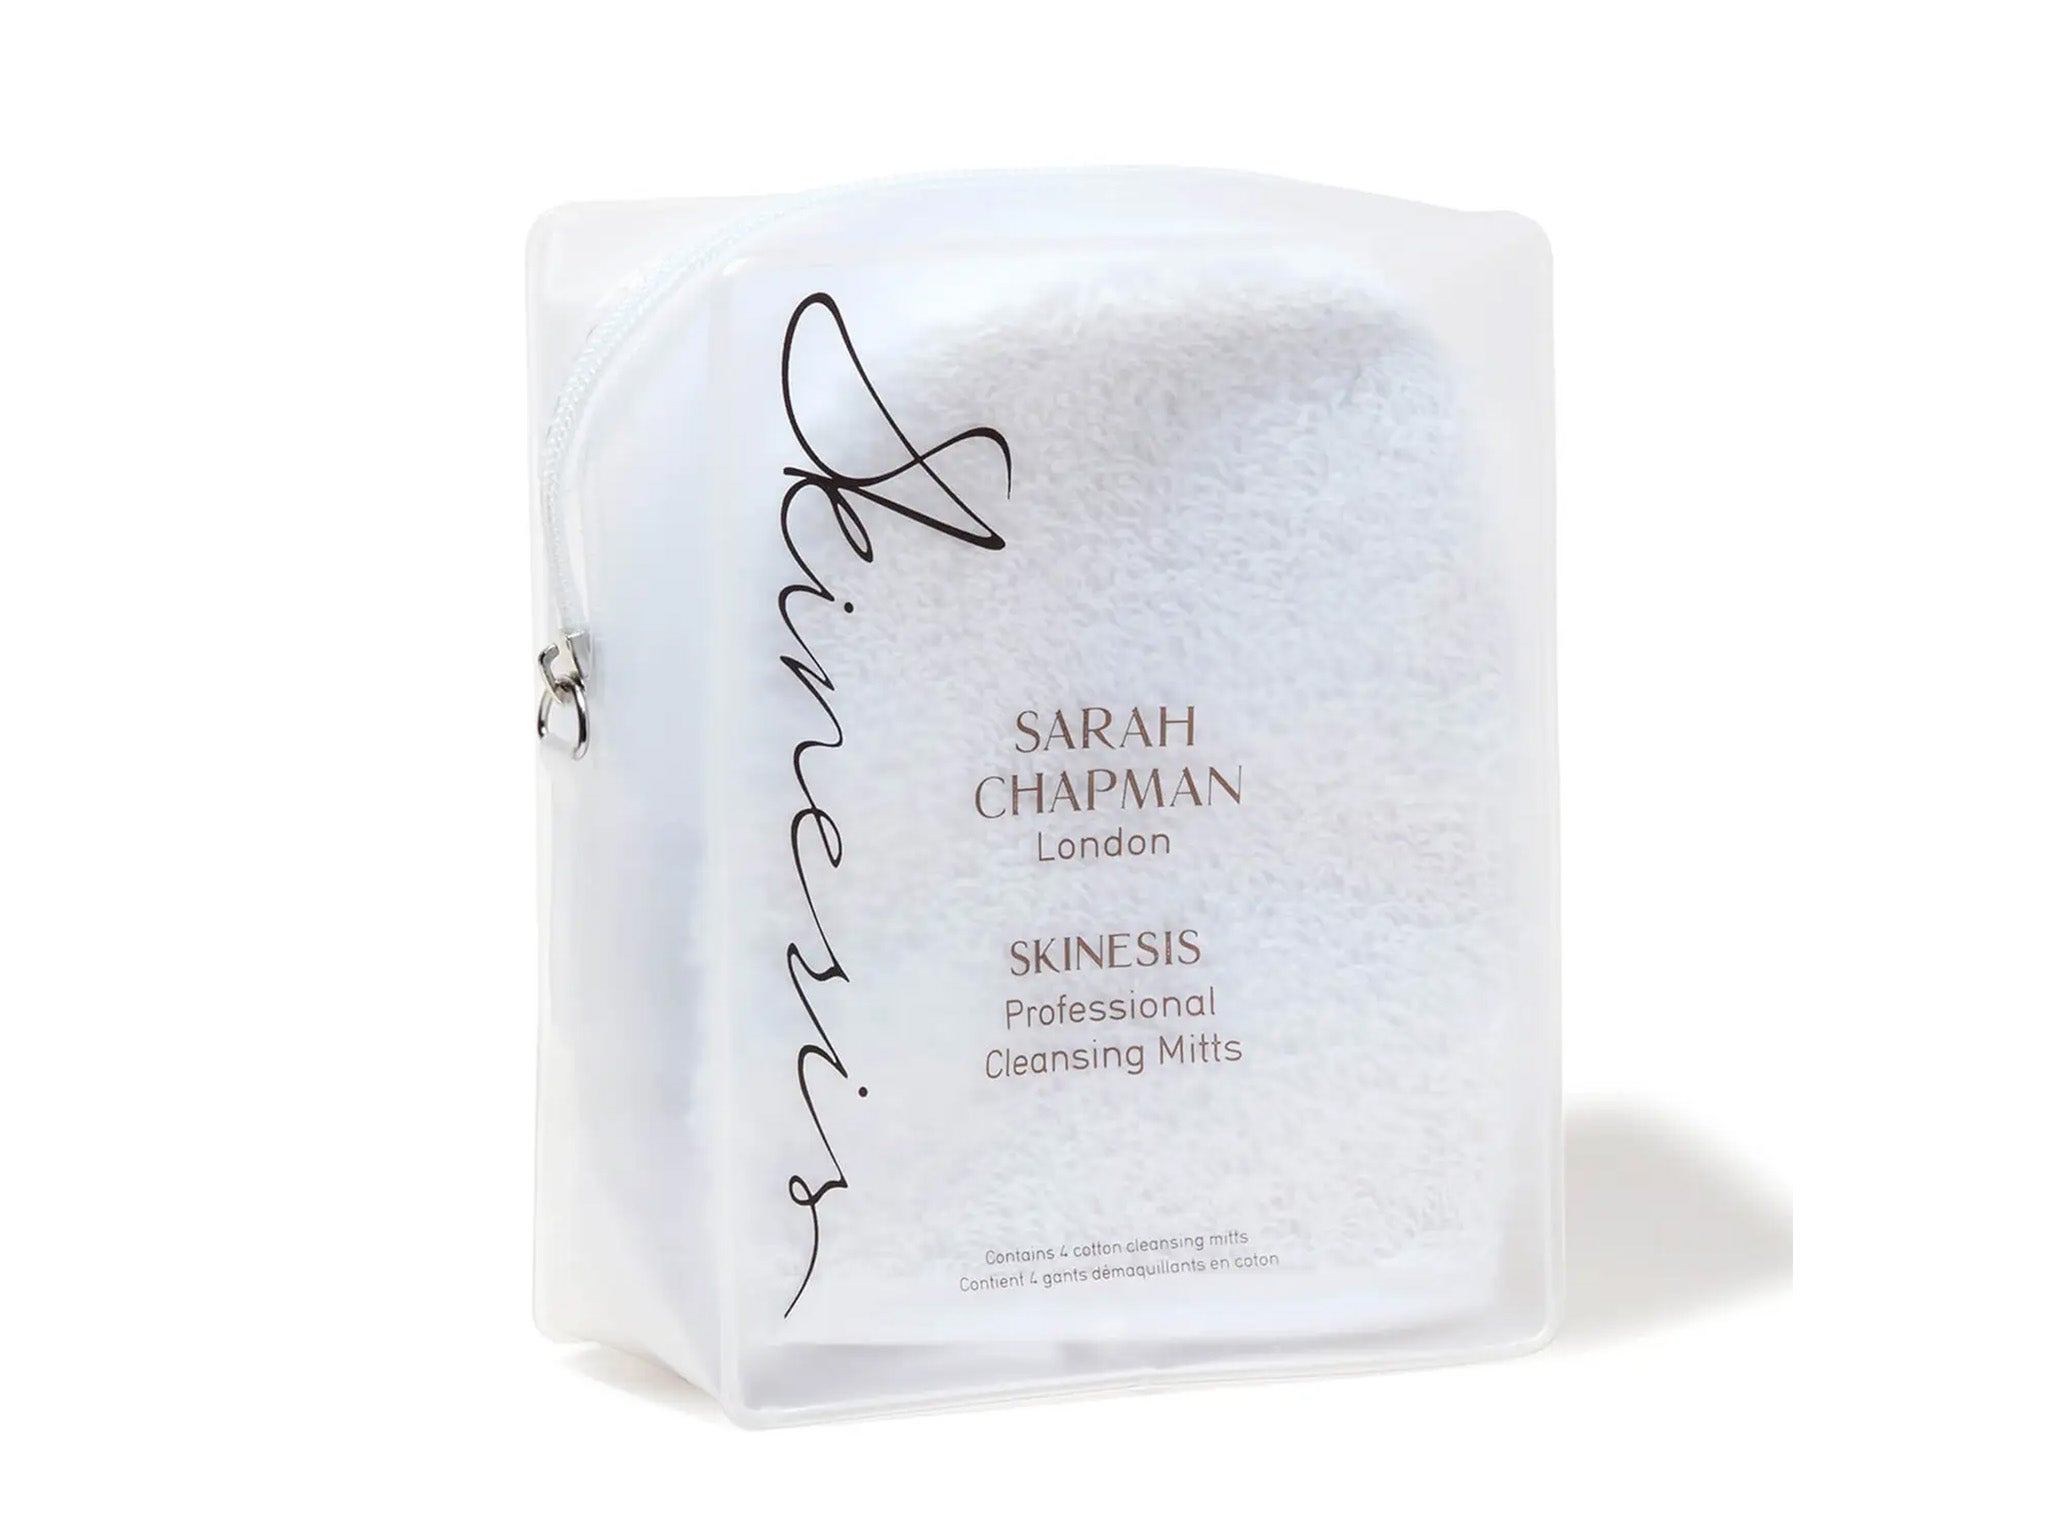 Sarah Chapman skinesis professional cleansing mitts, pack of four